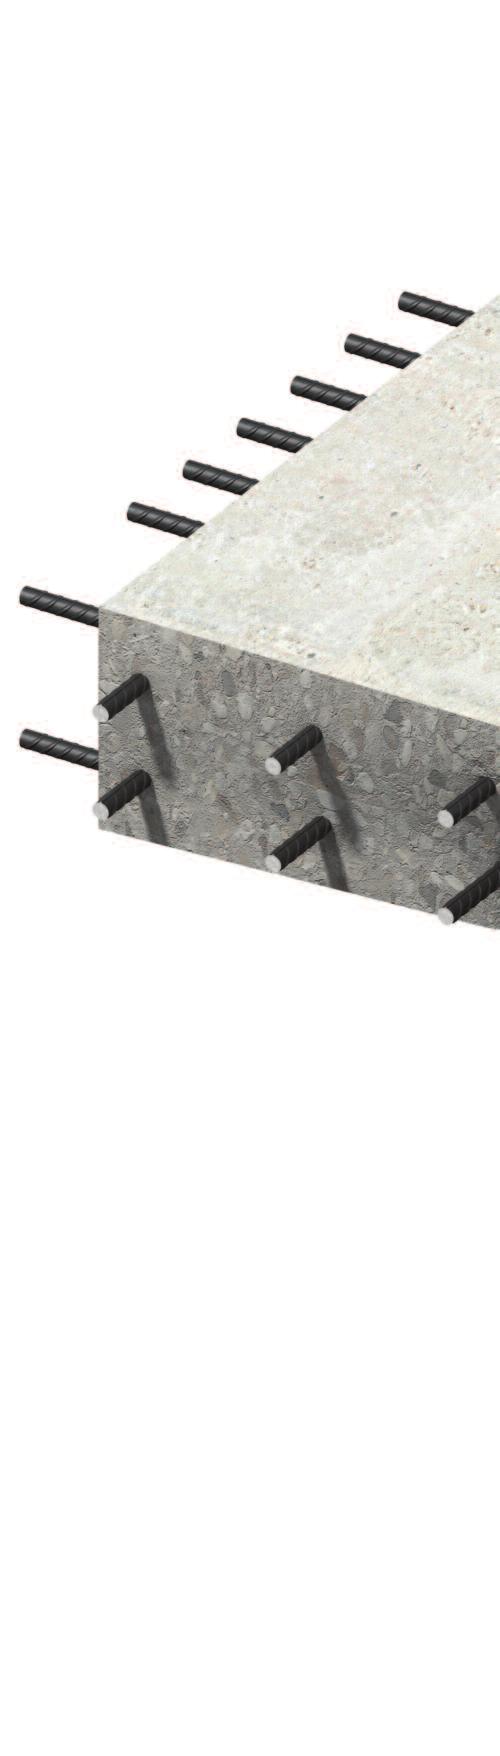 Reinforcing Bar Couplers Simplify the design and construction